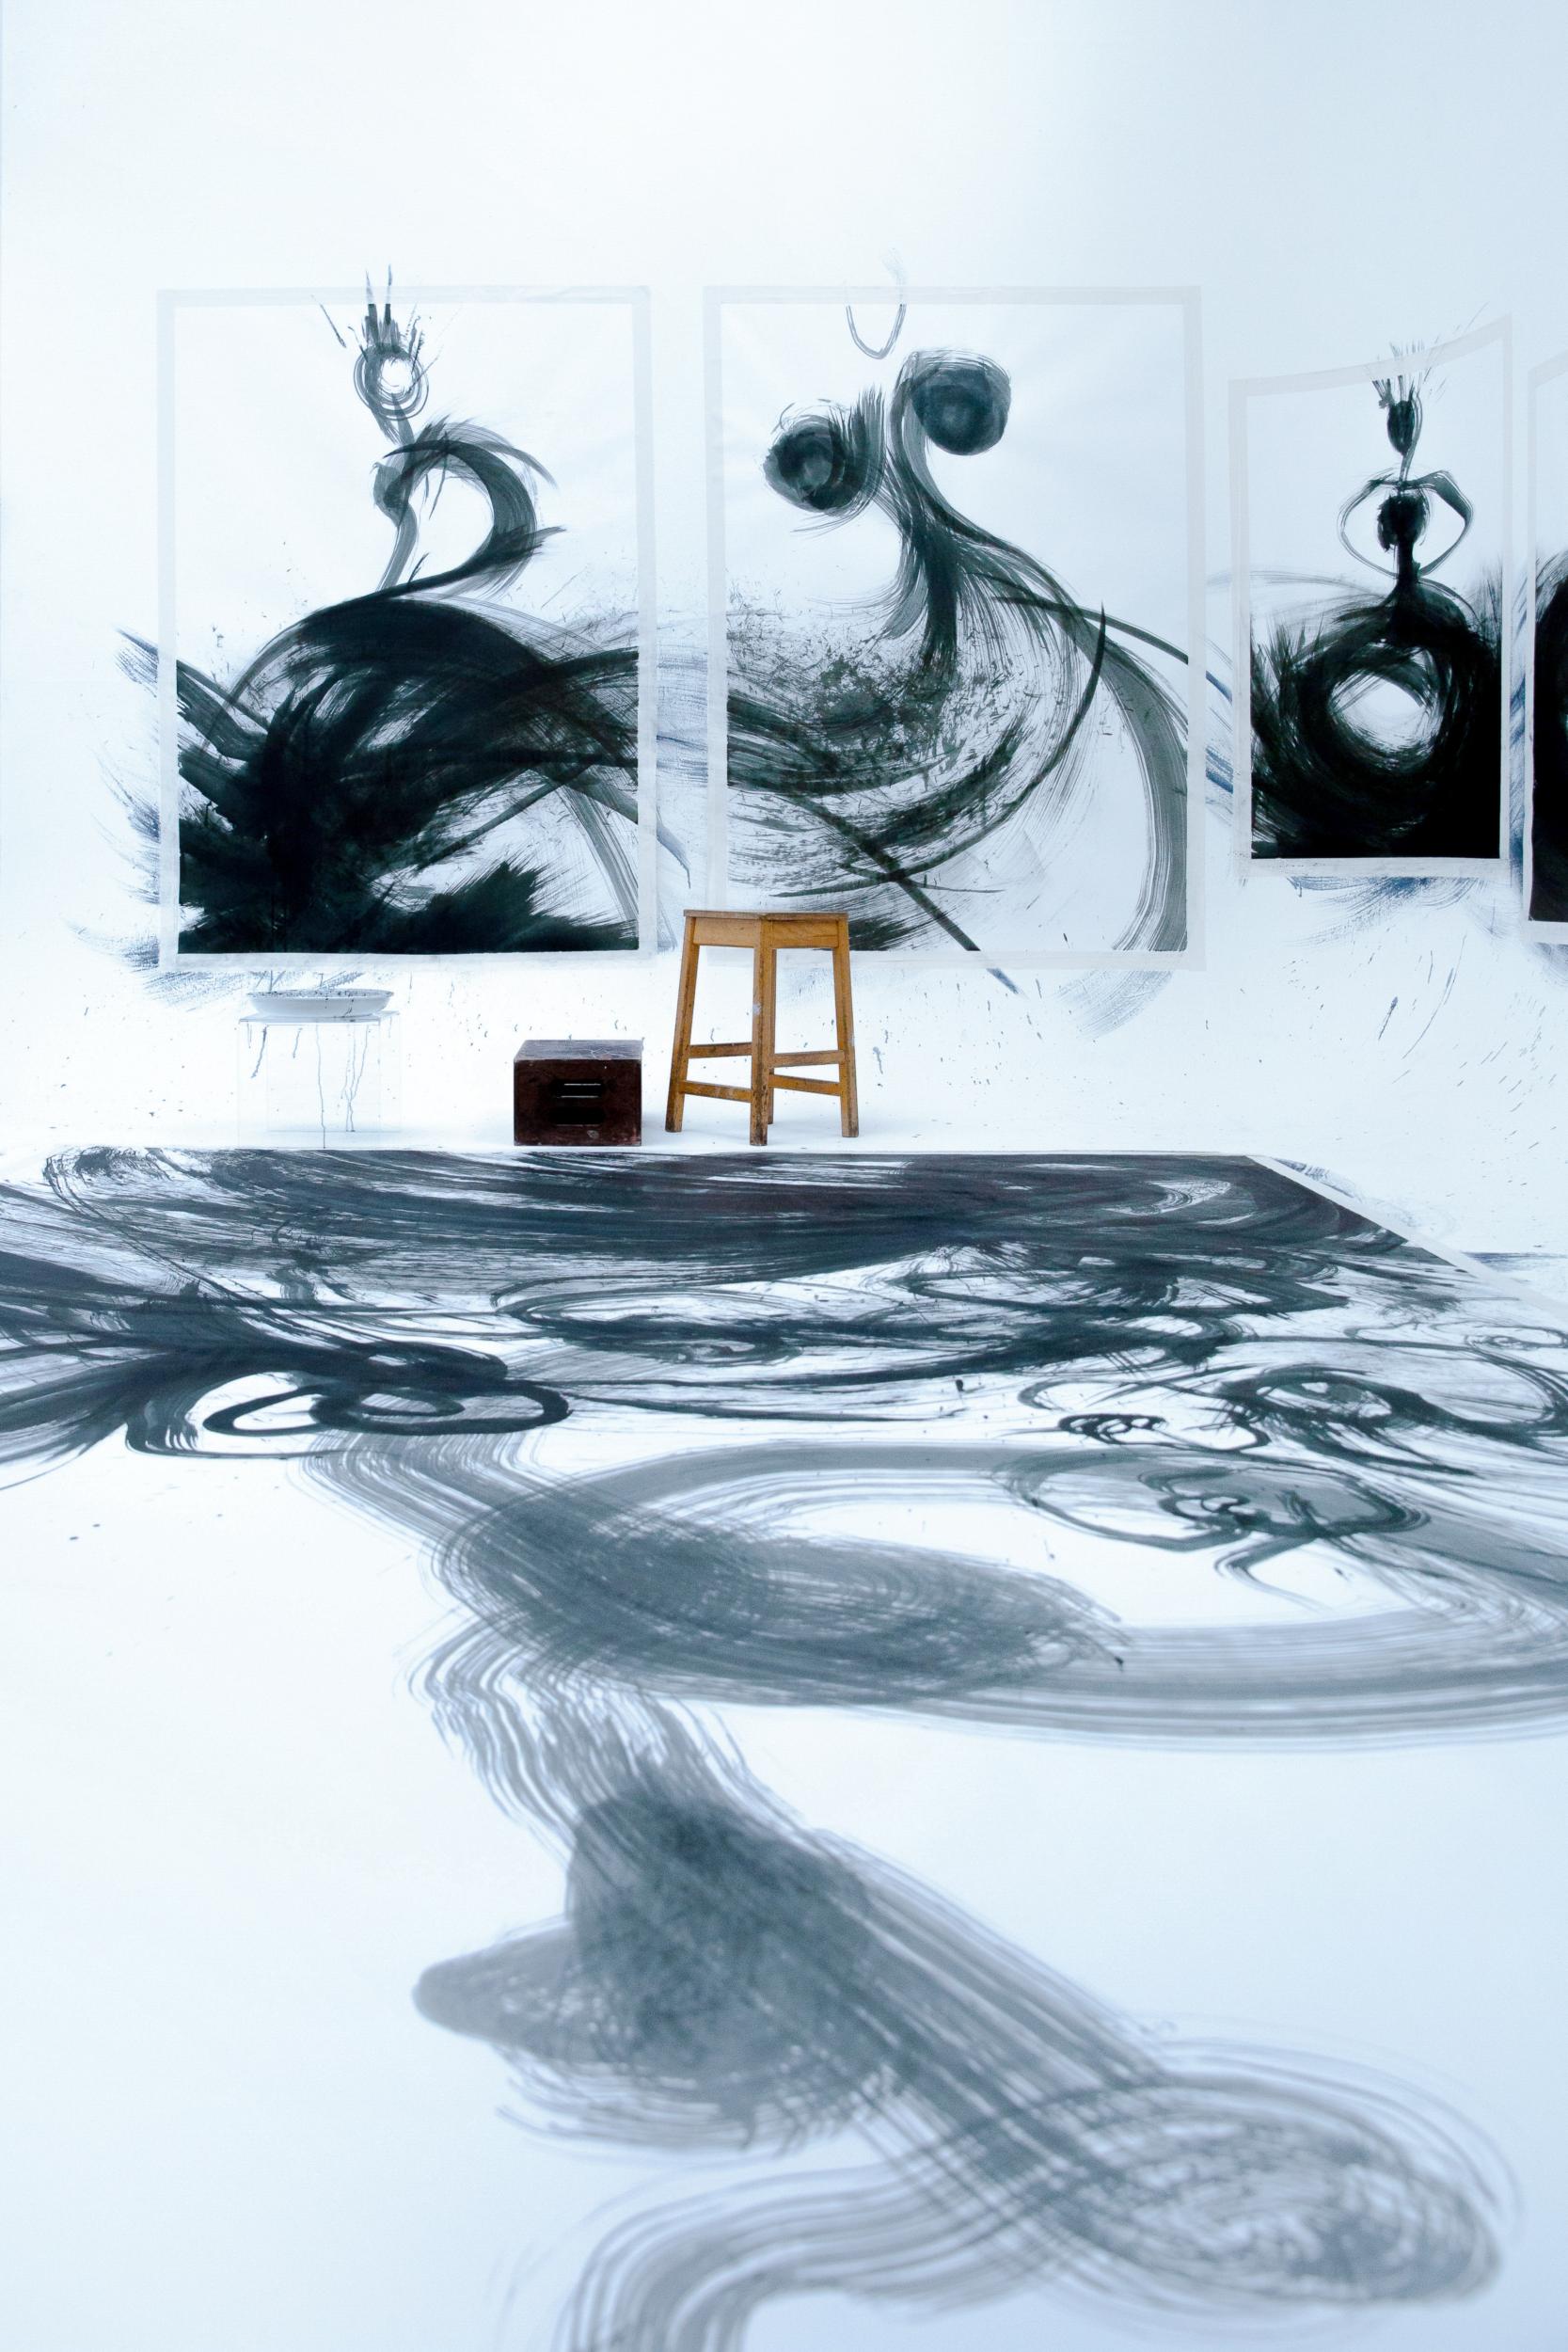  | SHOWStudio | Nightlight Series: On 26 April 2019, artist Tobie Giddio took up residency in the SHOWstudio space to create a large-scale fashion illustration live. The broadcast showcases Giddio’s creative process from start to finish, documenting her as she paints the walls and floor of the studio cove with ink. For this work, Giddio utilises a unique set of tools, comprising large Japanese brushes, mops and feather dusters.  | 11